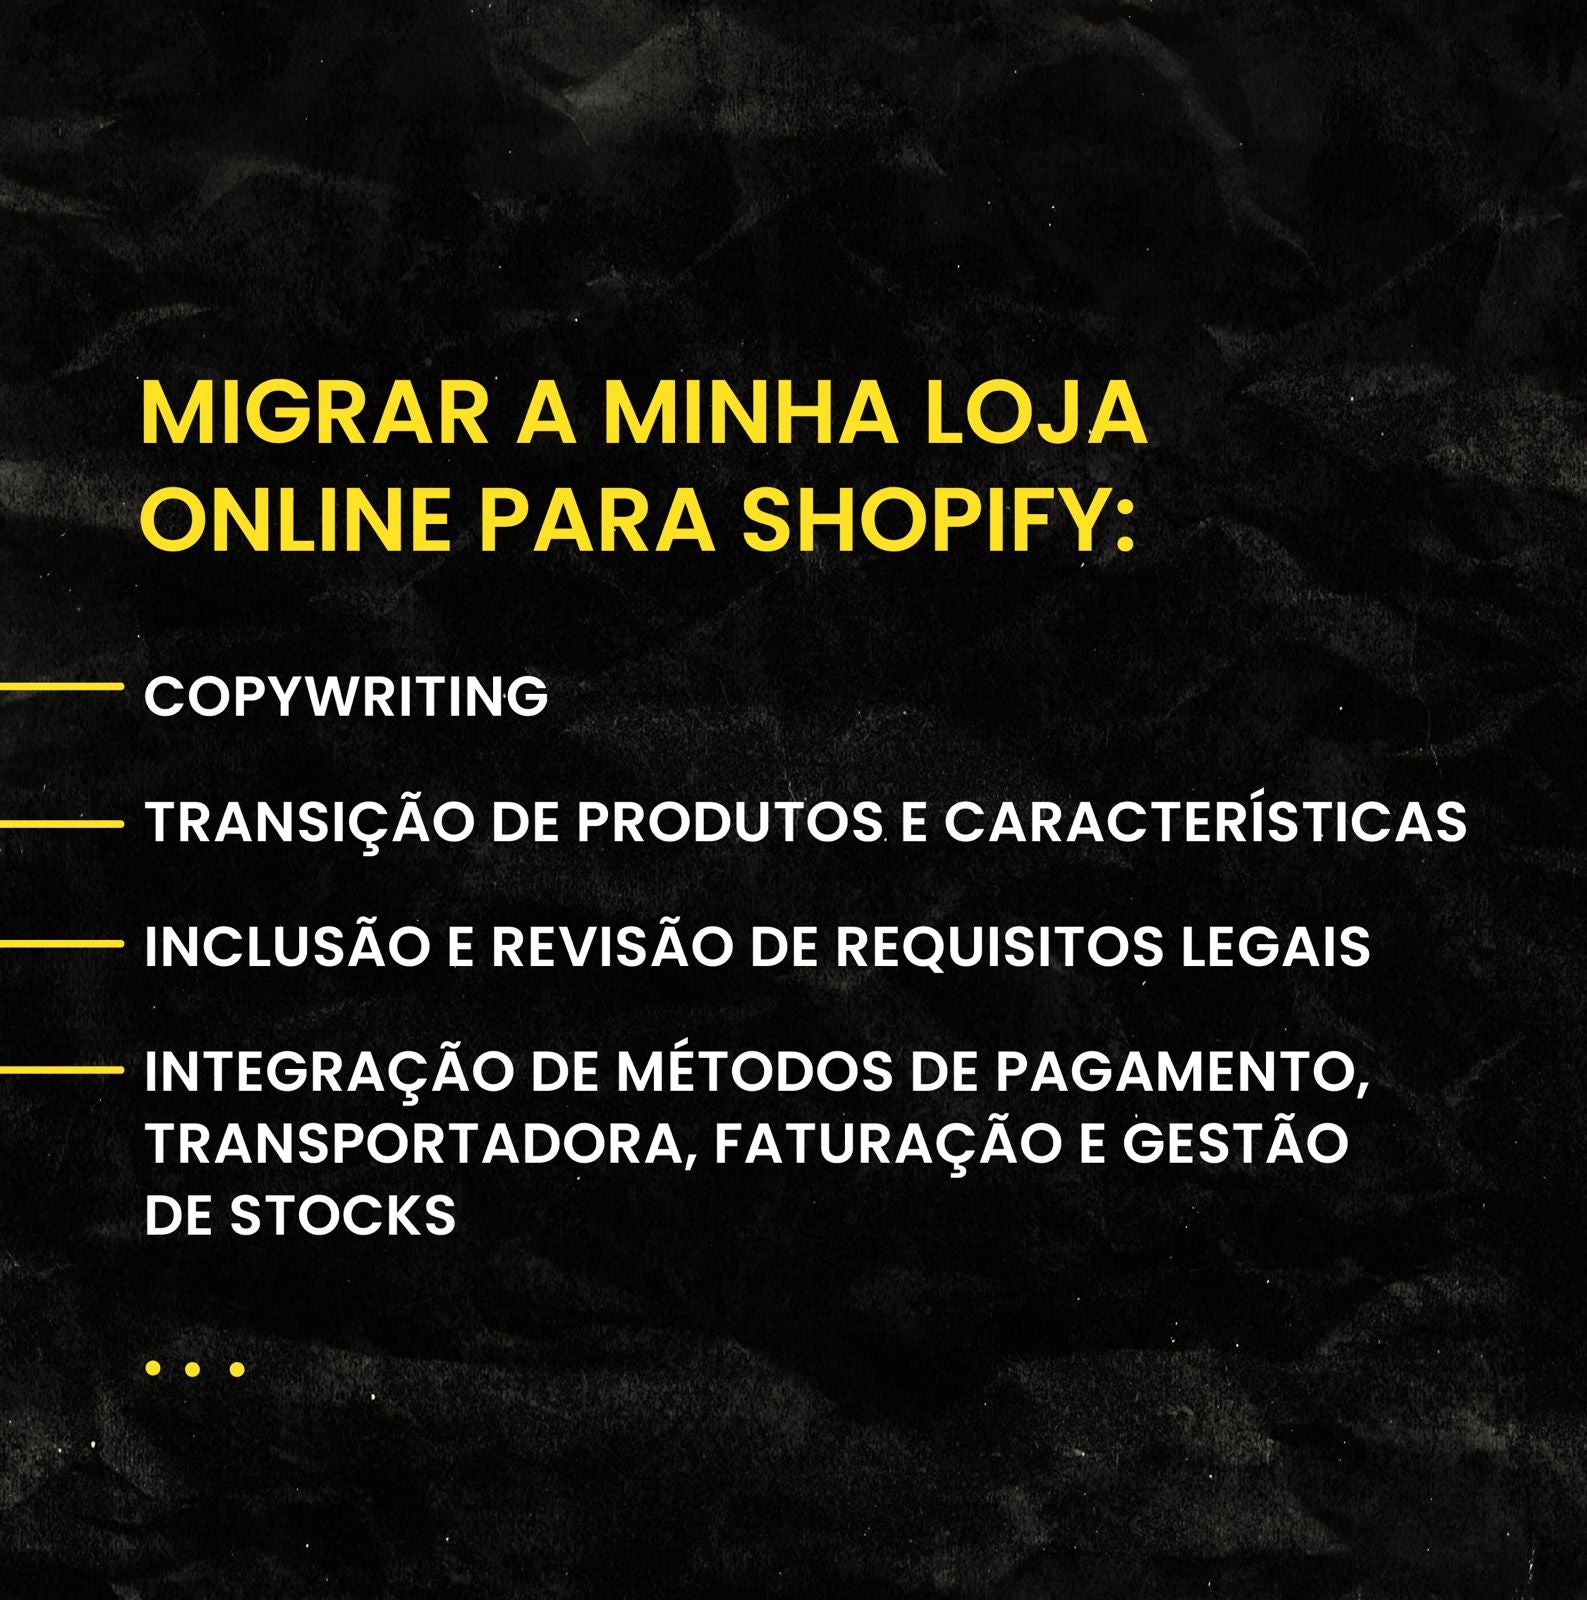 Migrate my online store to Shopify